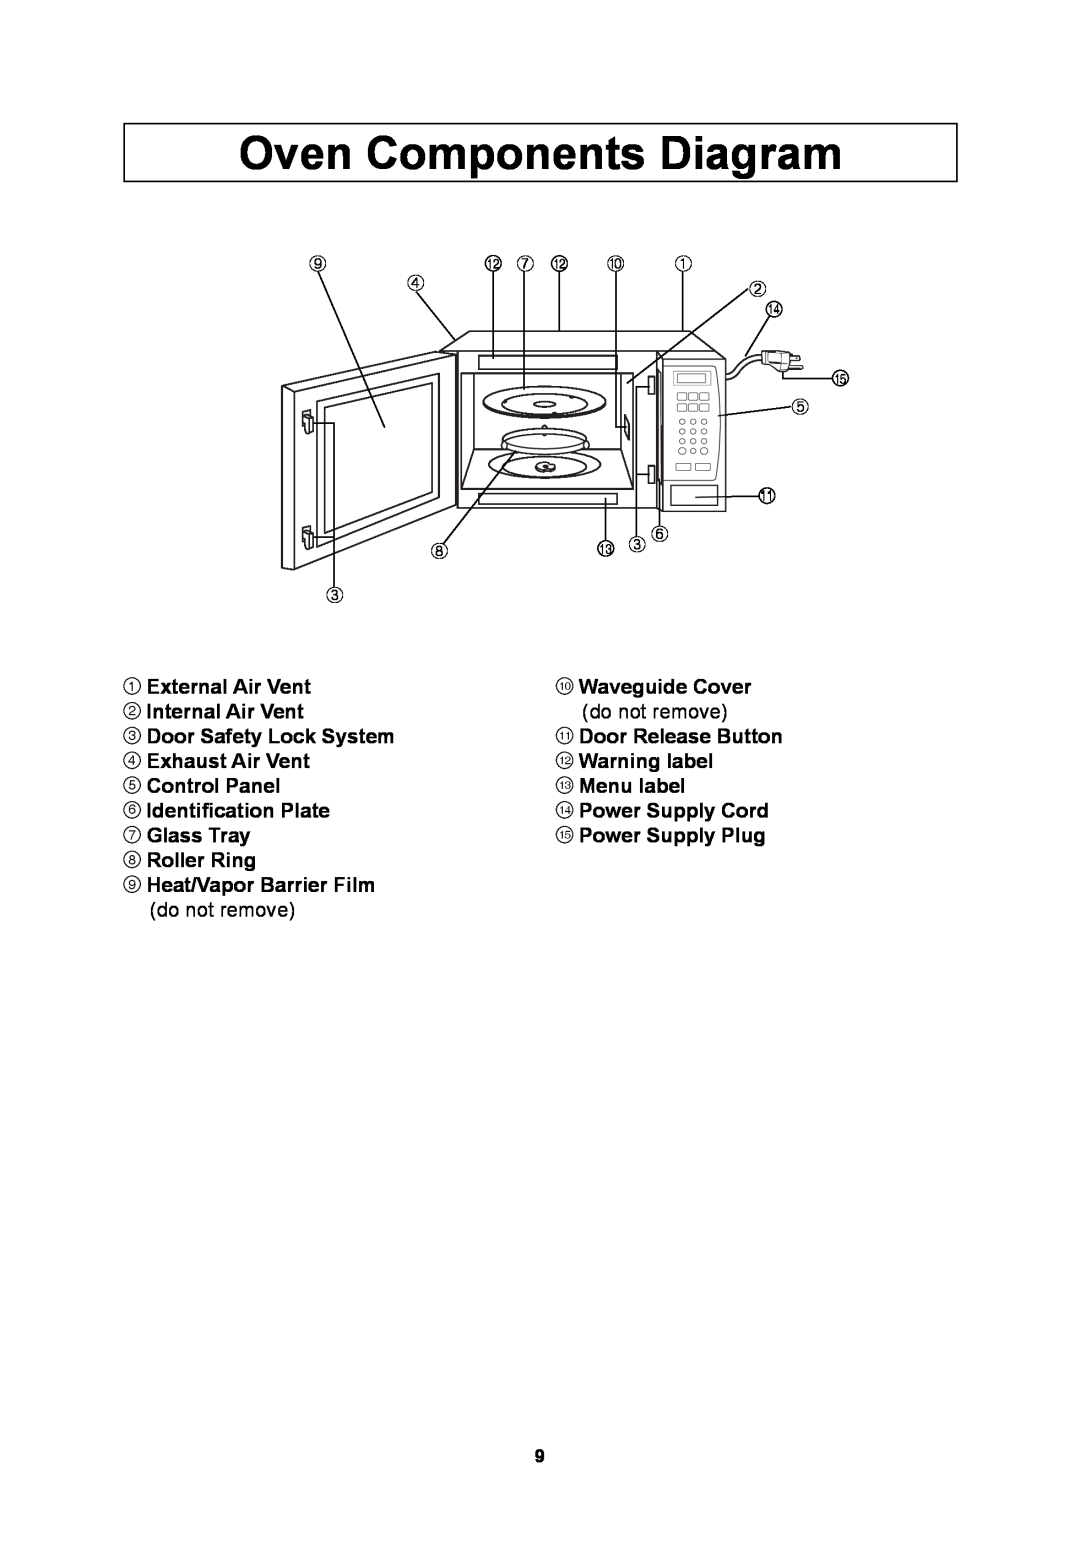 Panasonic NNSN973S important safety instructions Oven Components Diagram 